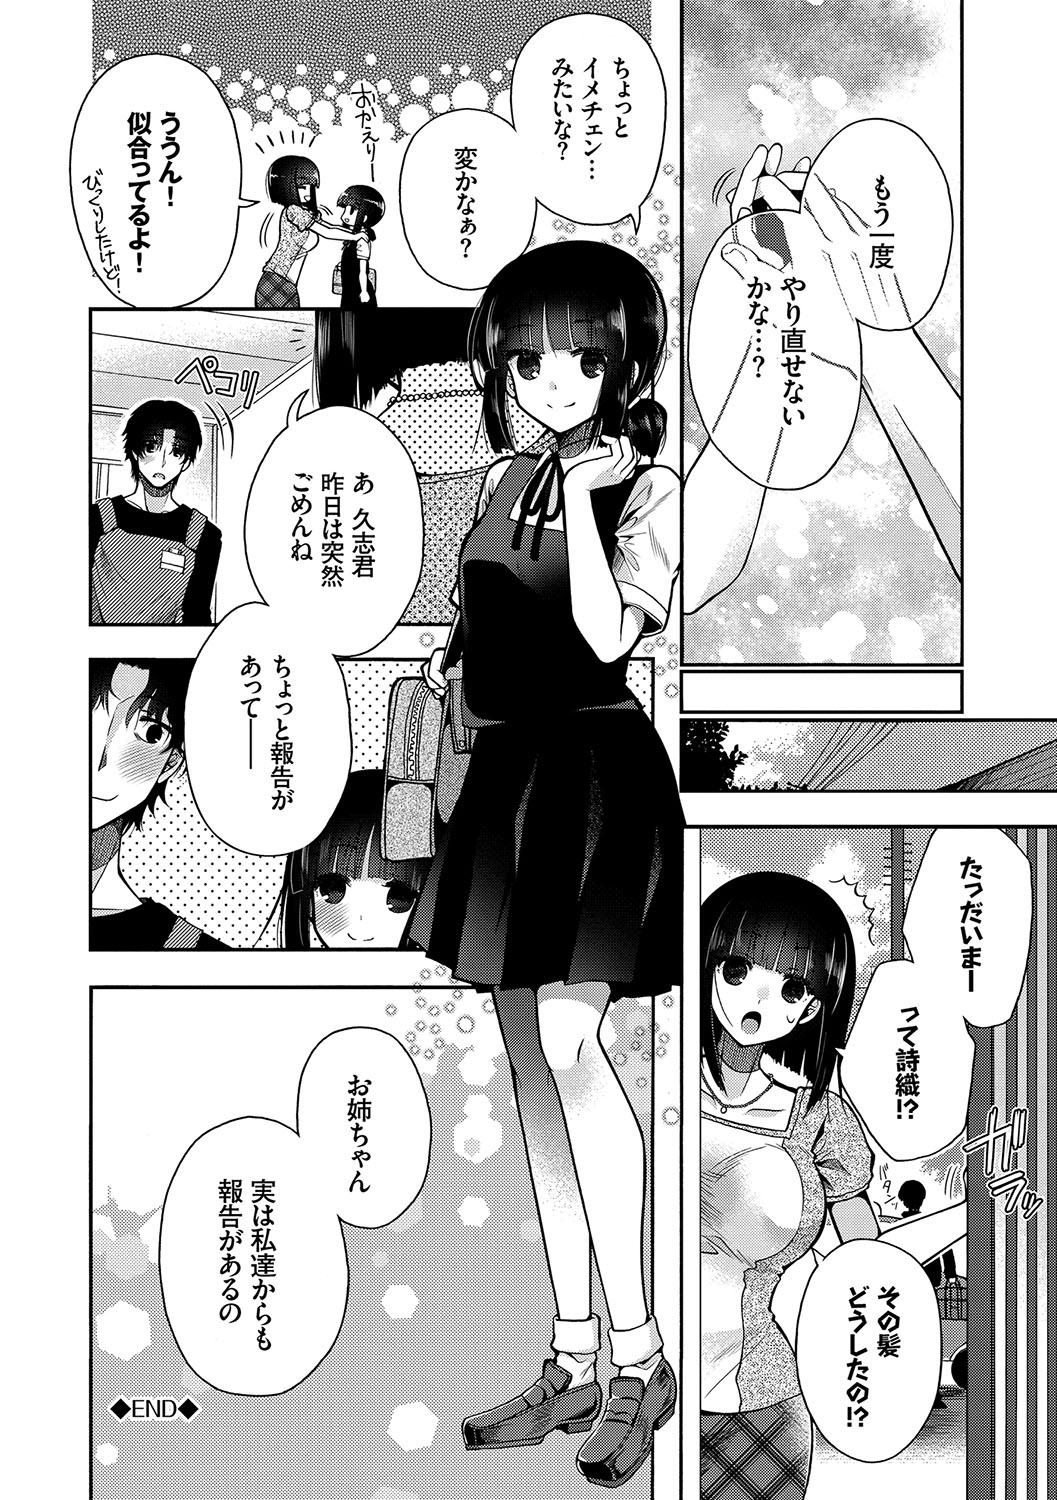 Hatsukoi Melty - Melty First Love 114